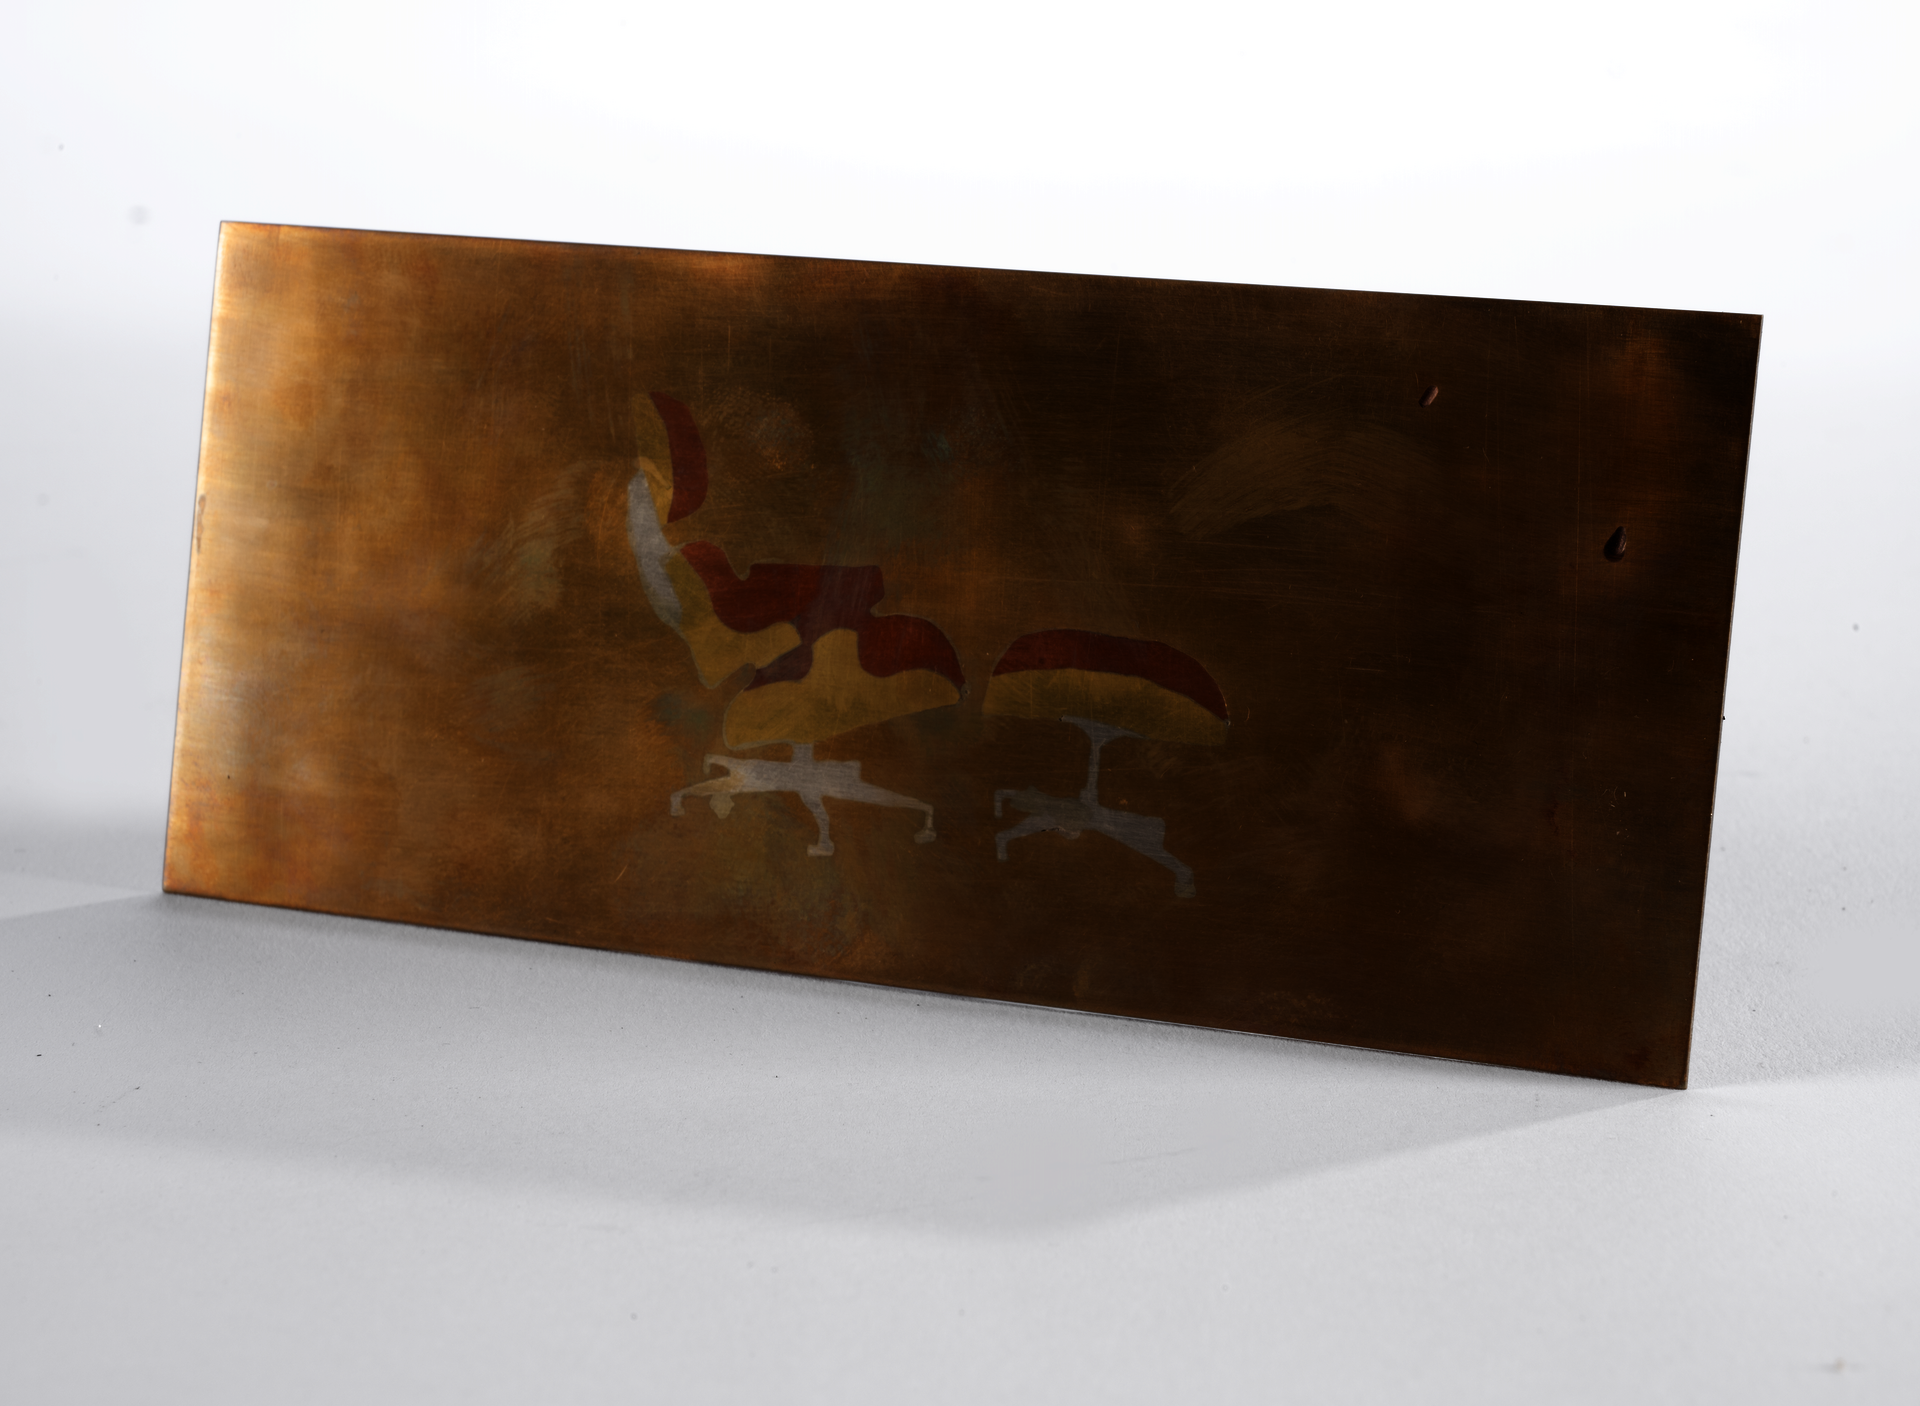 A thin rectangular sheet of bronze with an image in the center made of copper, brass, and silver depicting the side profile of the Eames Lounge Chair and Ottoman.